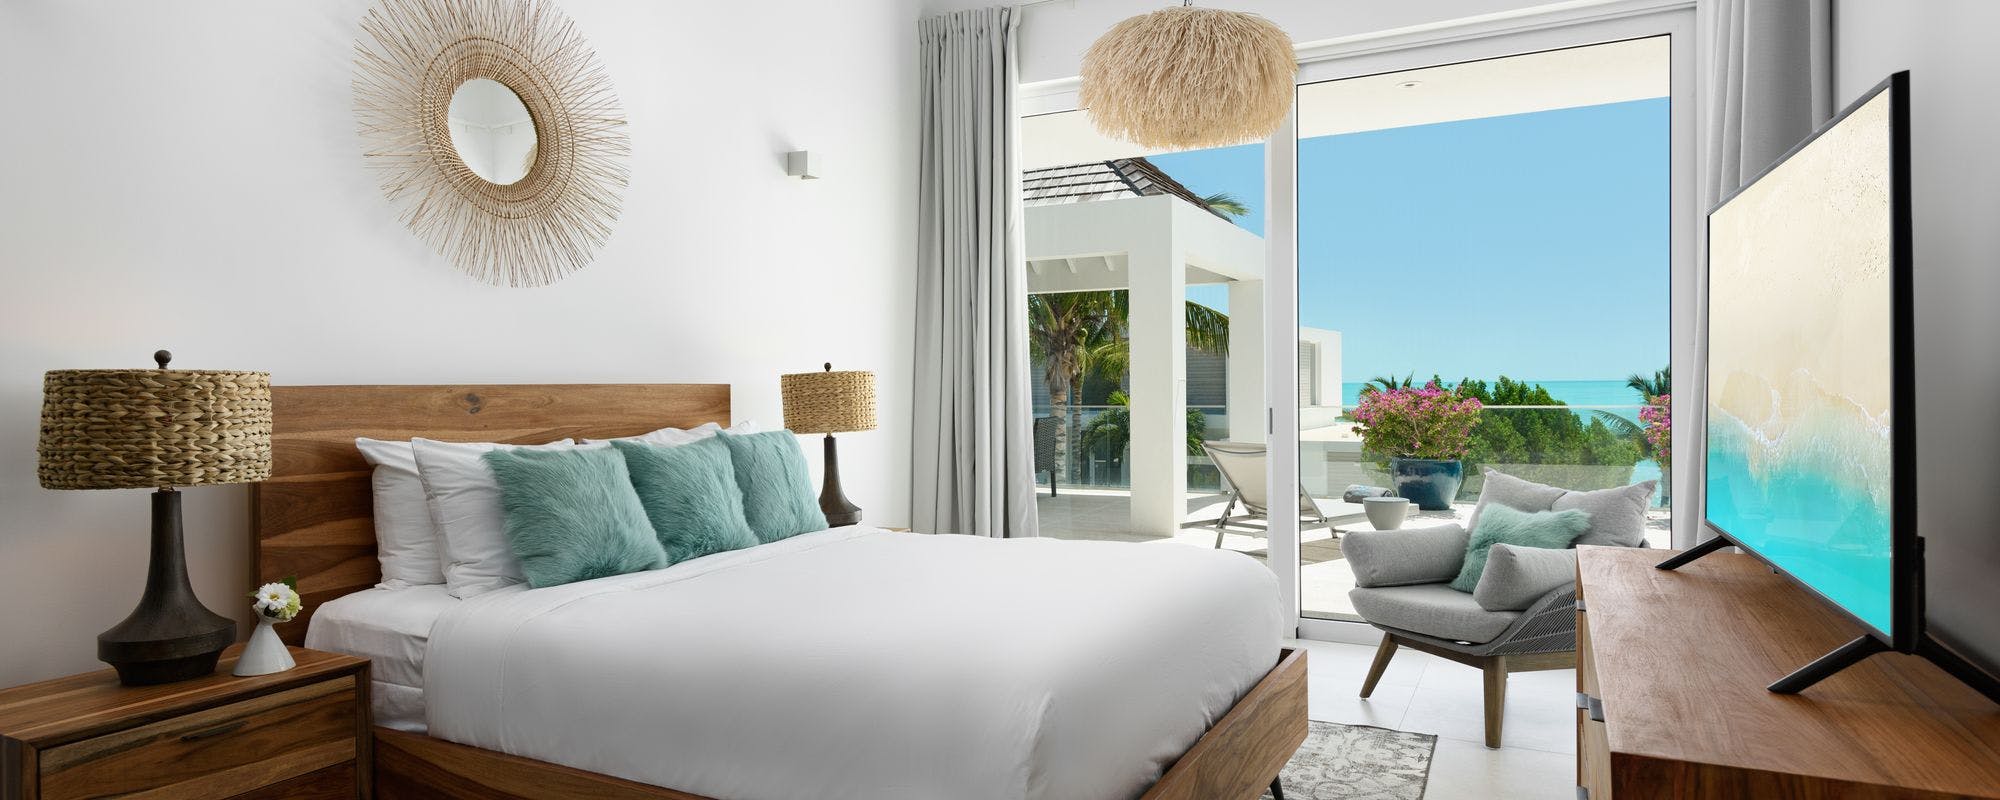 Primary bedroom with a view in a Turks and Caicos vacation rental.